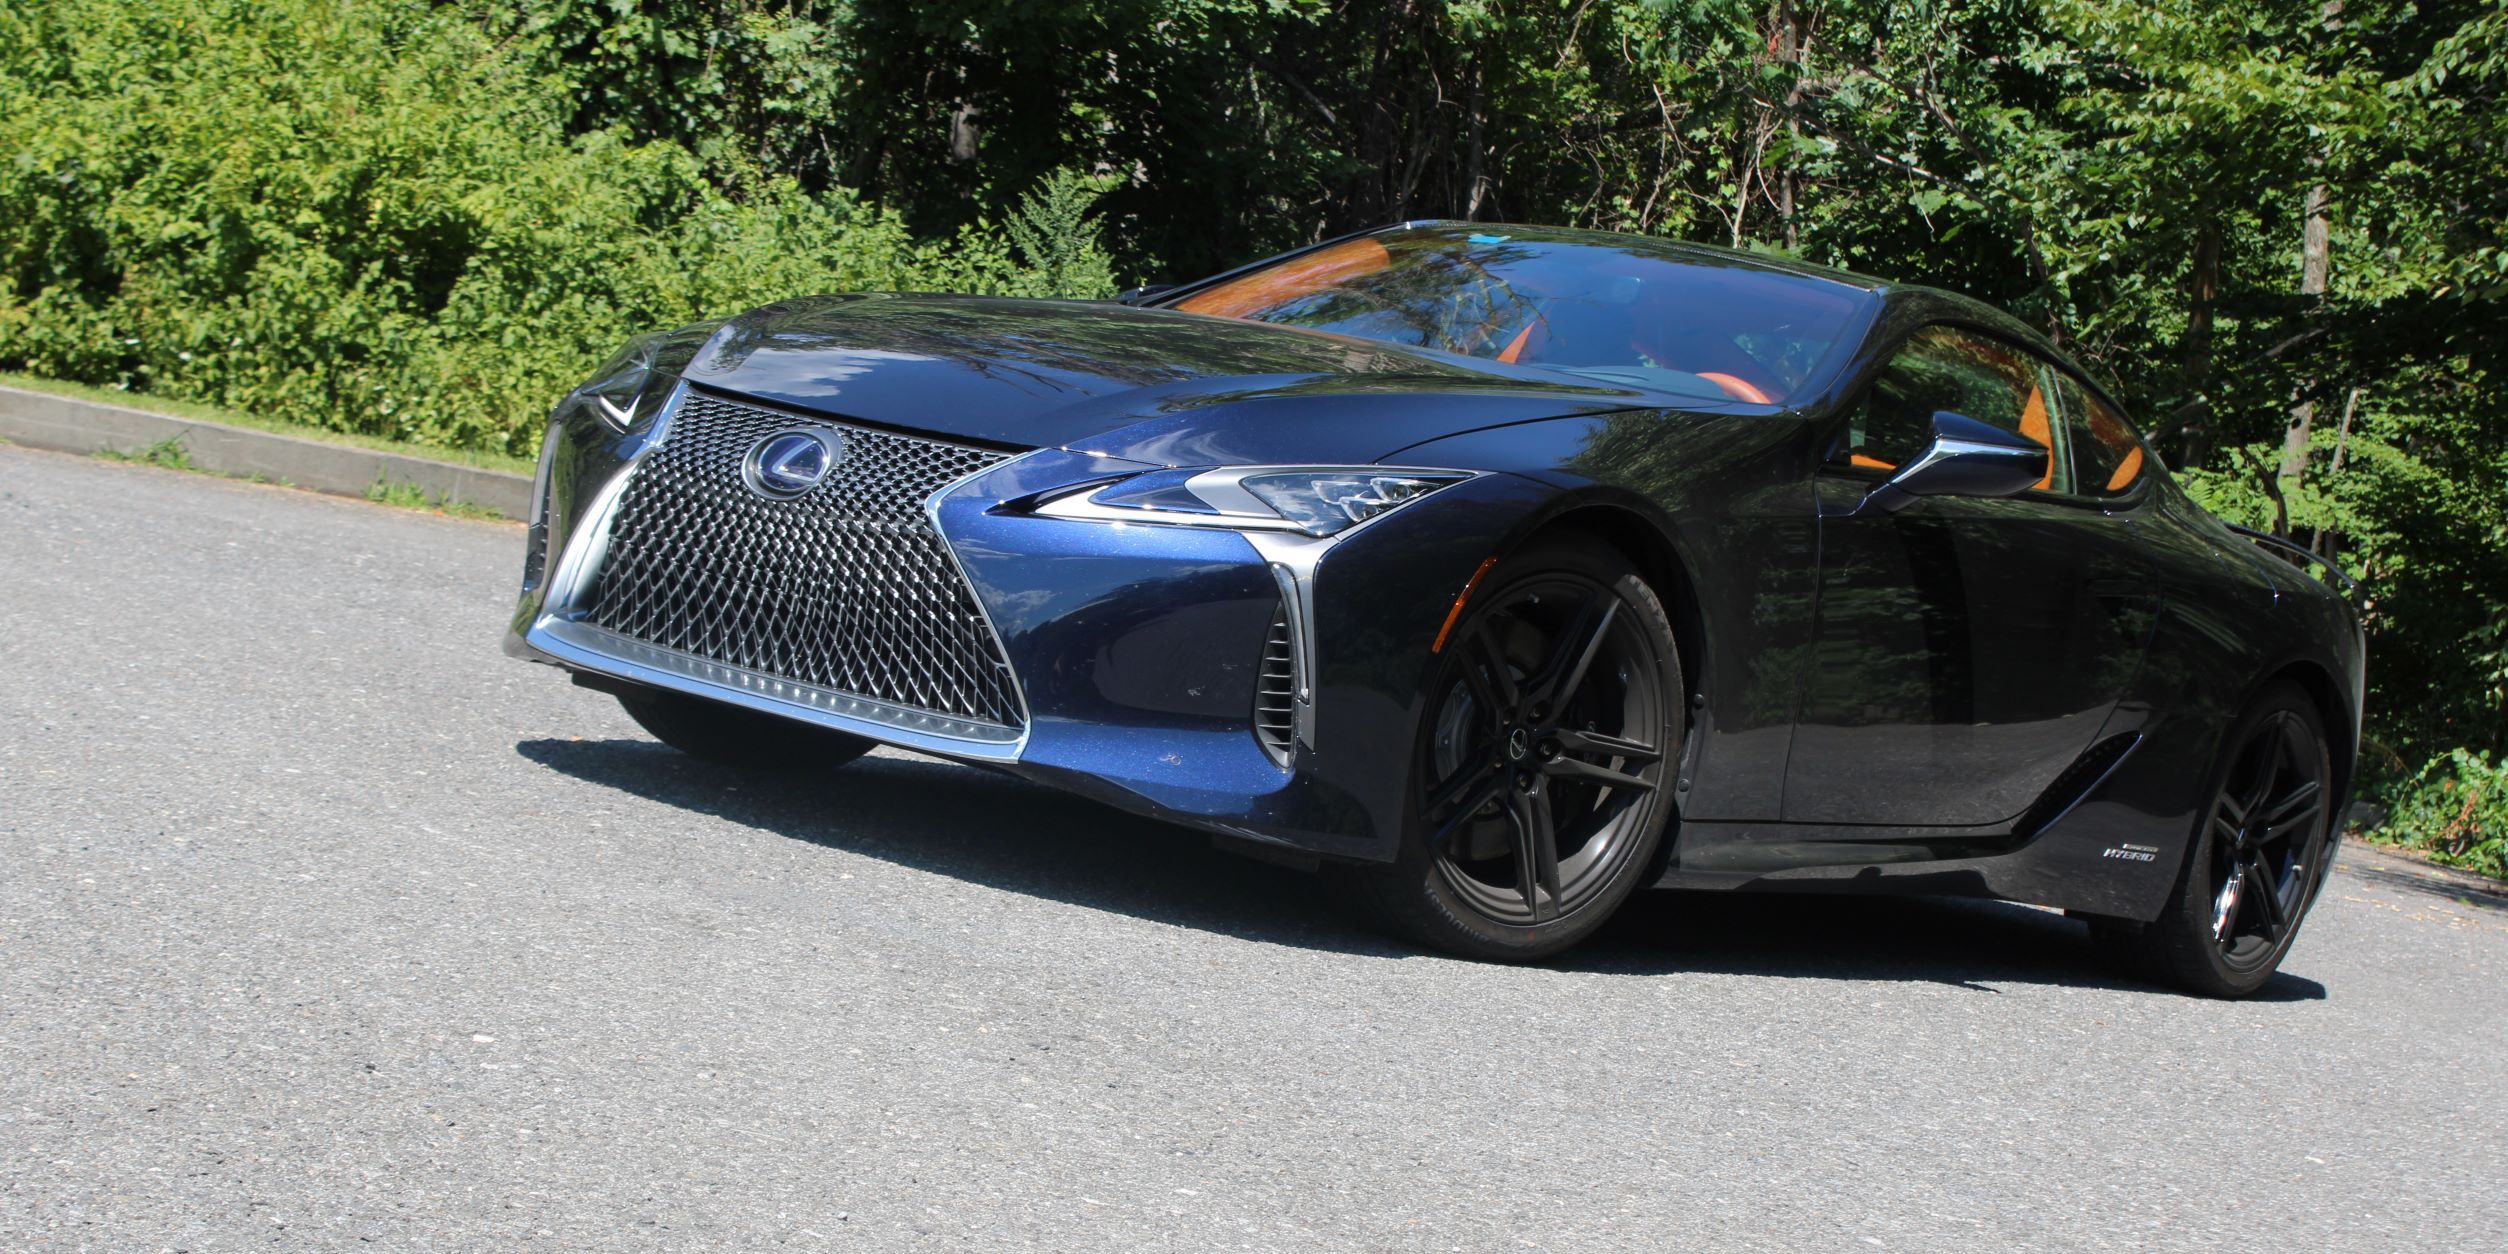 The Lexus LC 500h Is Two Cylinders Off the Greatest Grand Tourer You Can Buy